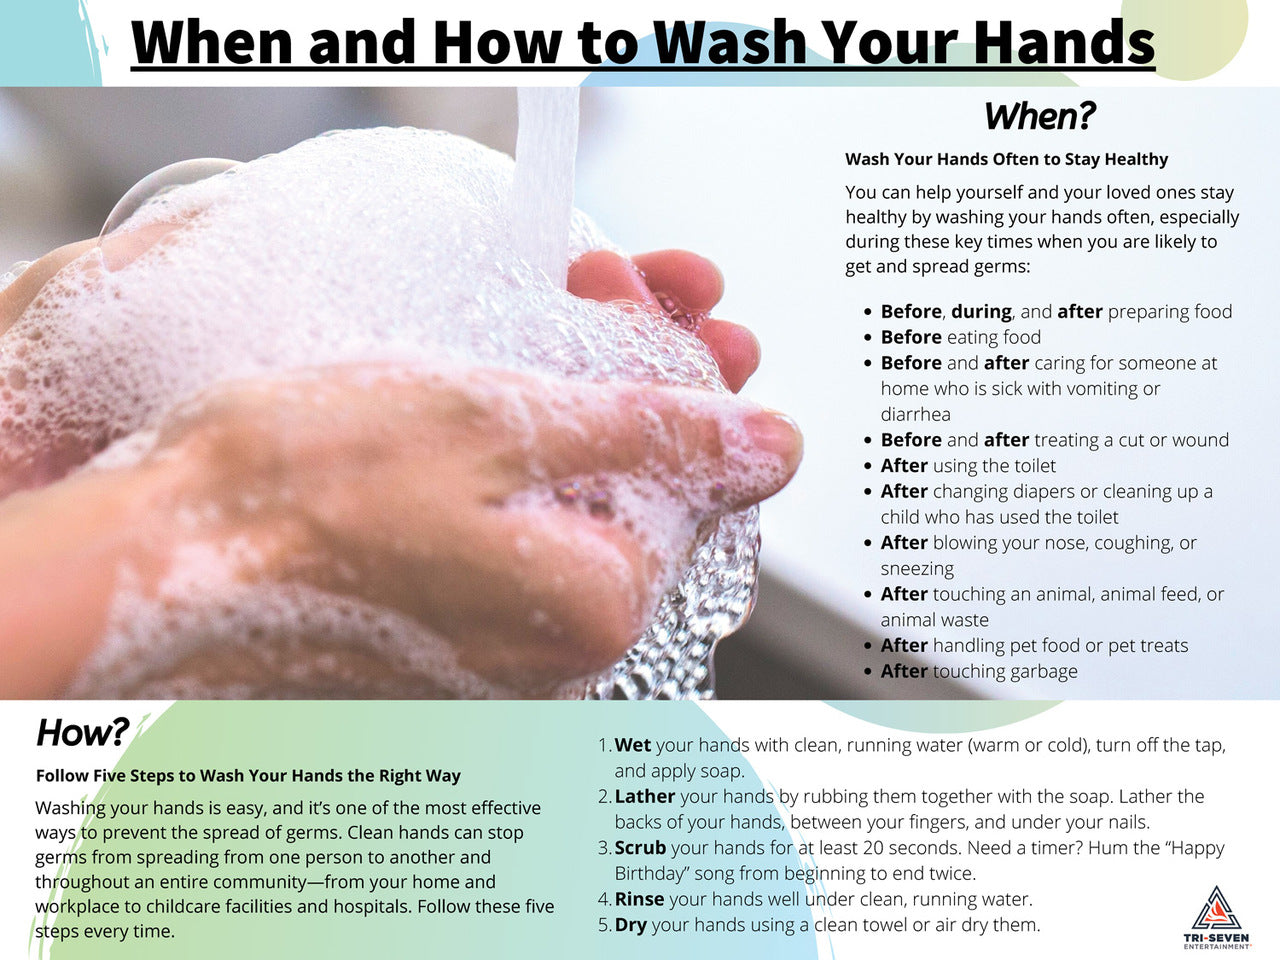 how to wash your hands poster coronavirus covid-19